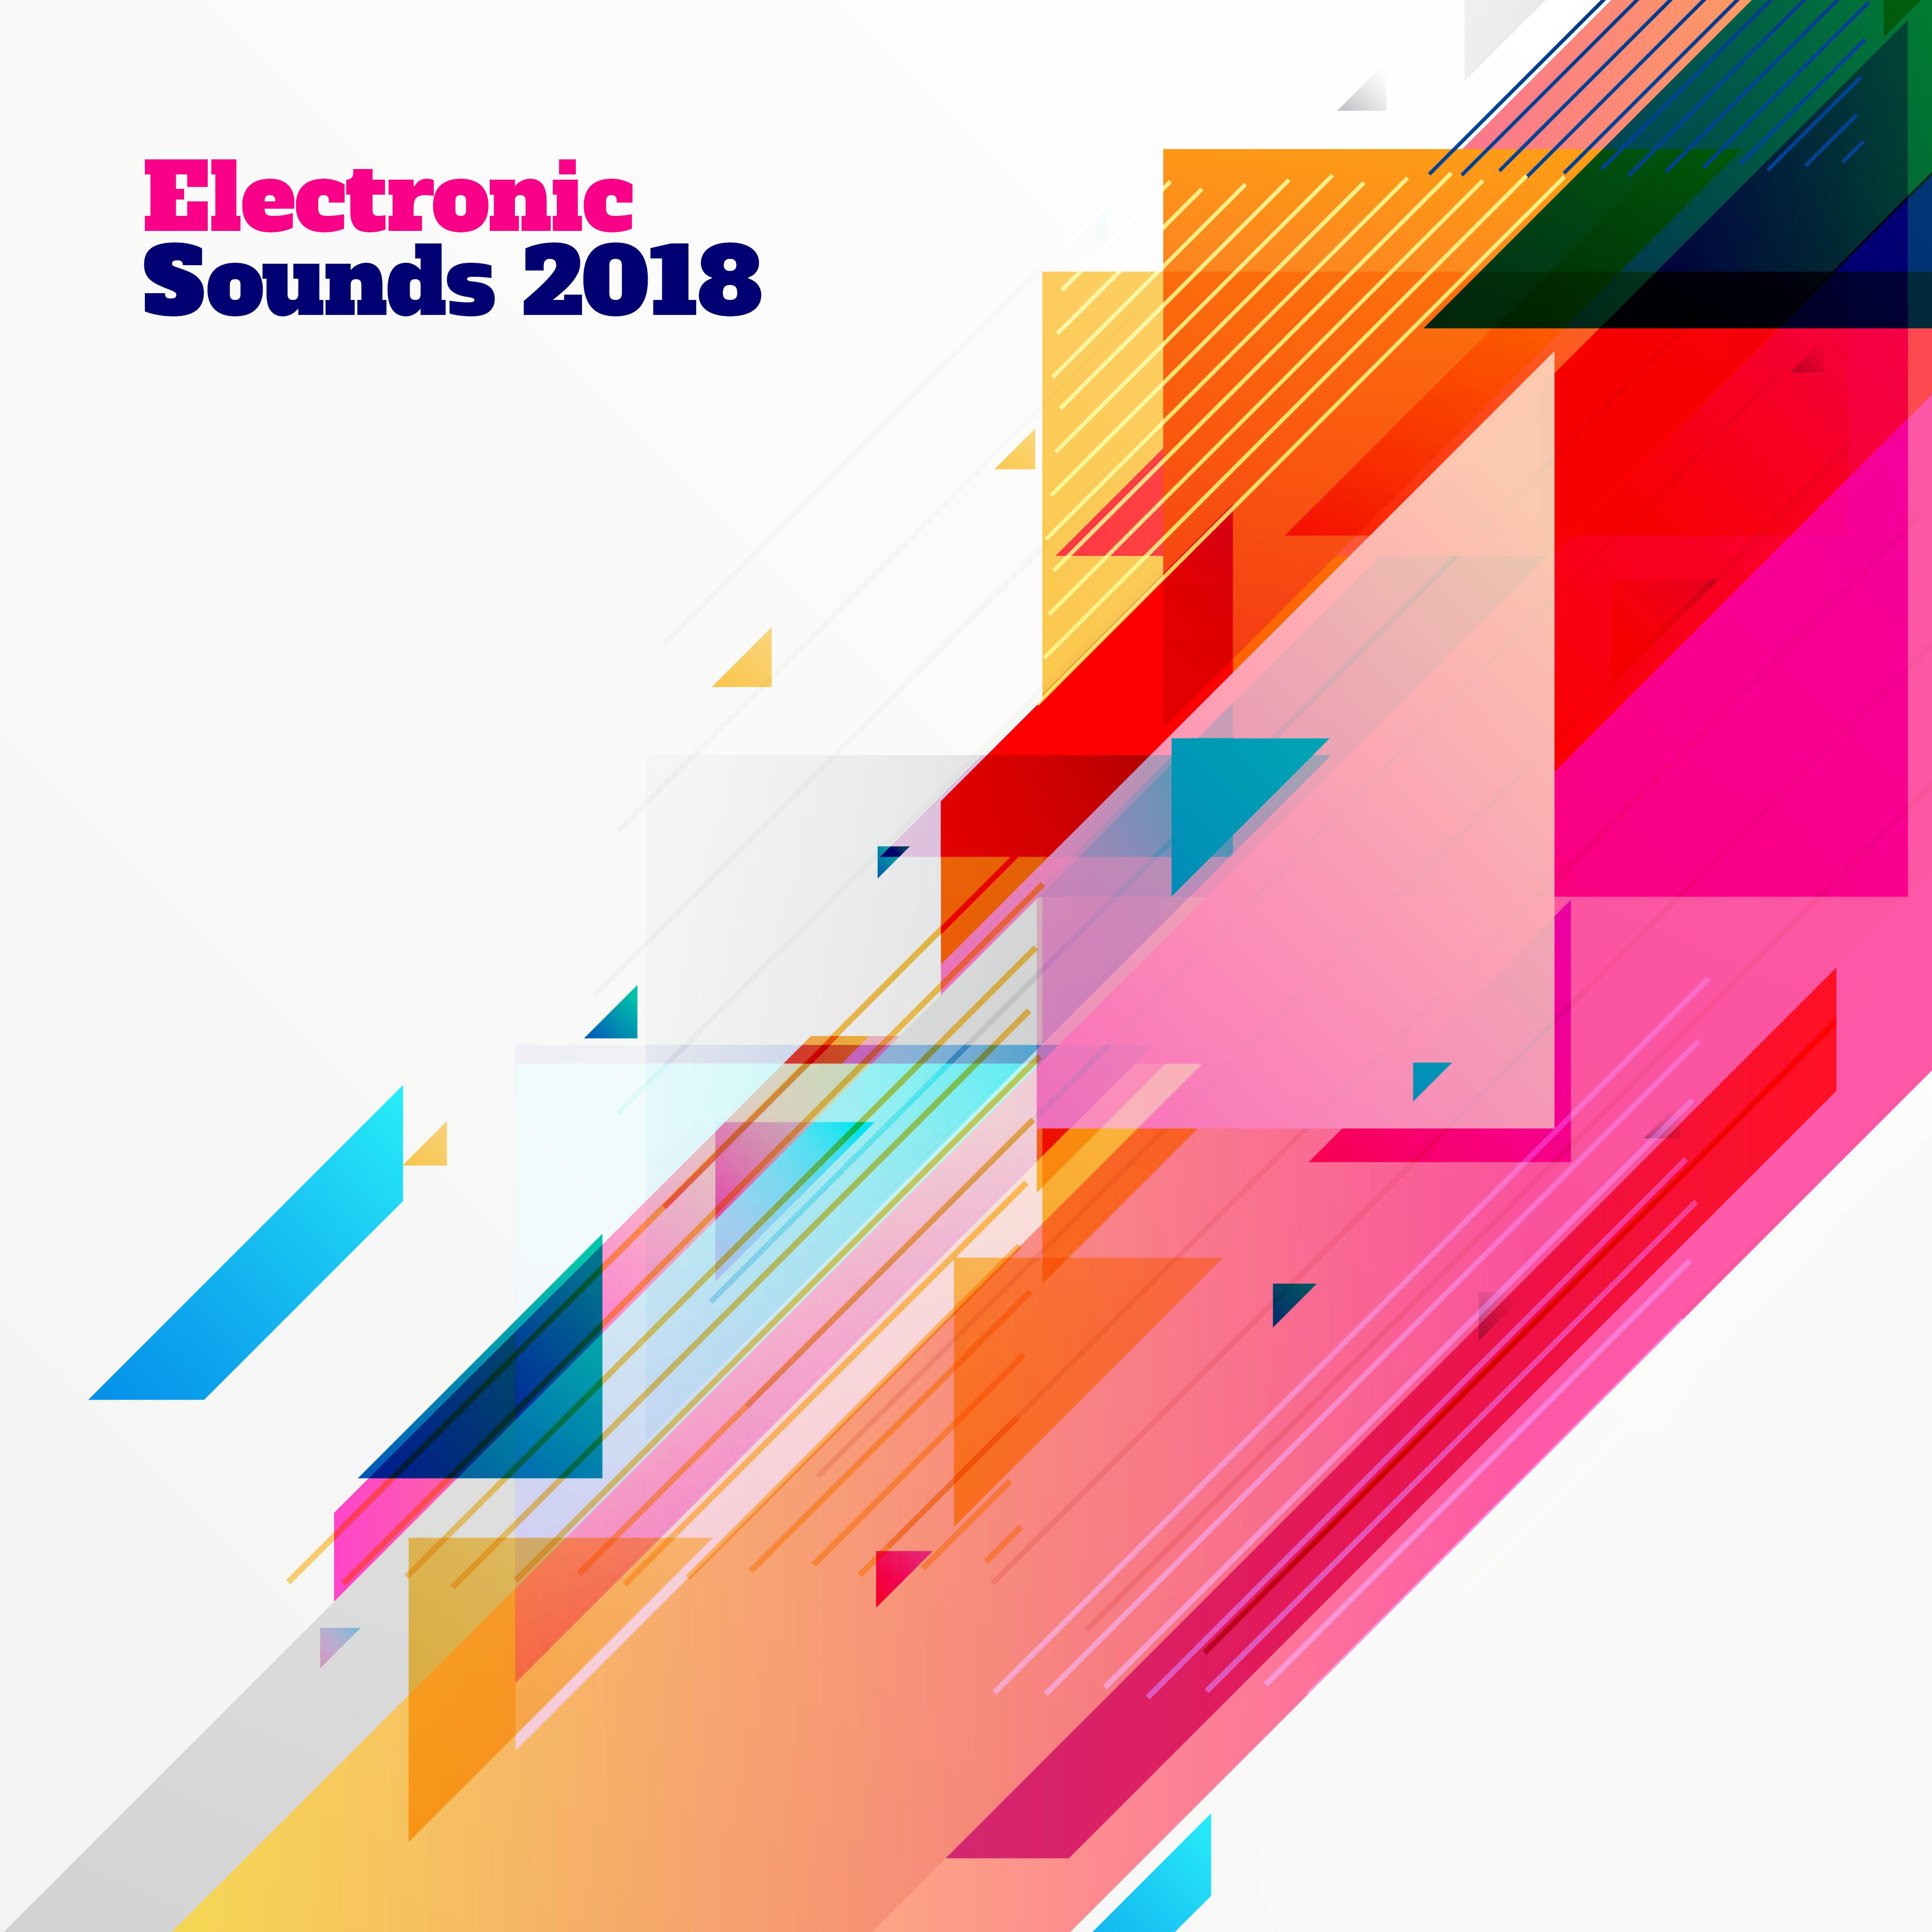 Electronic Sounds 2018